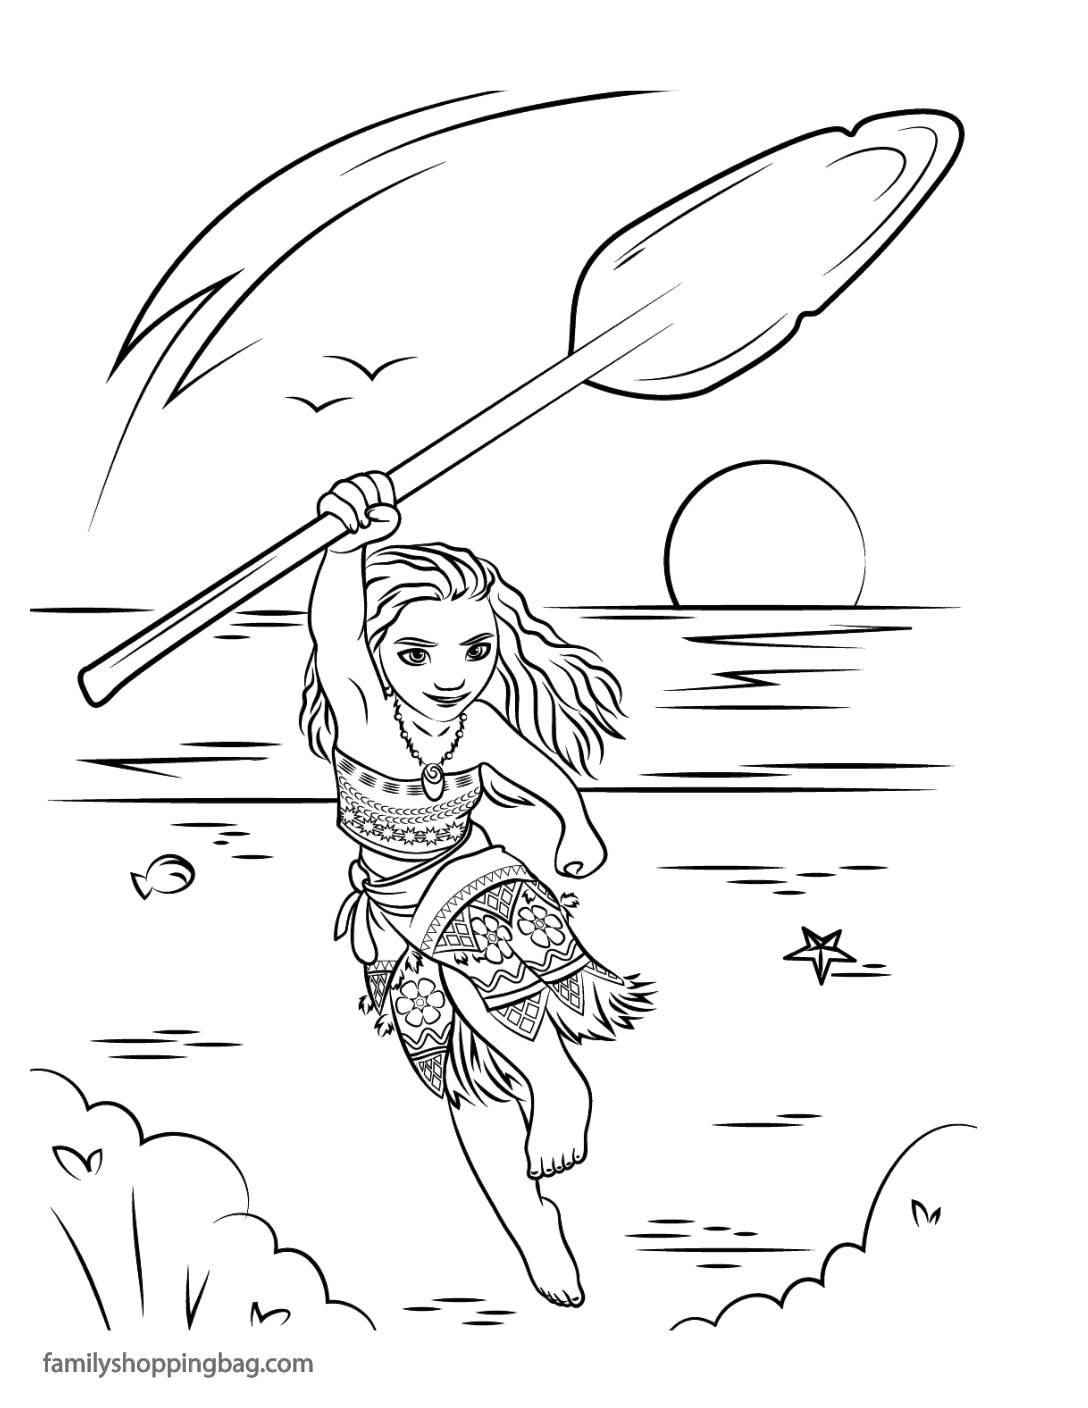 Coloring Page 2 Moana Coloring Pages